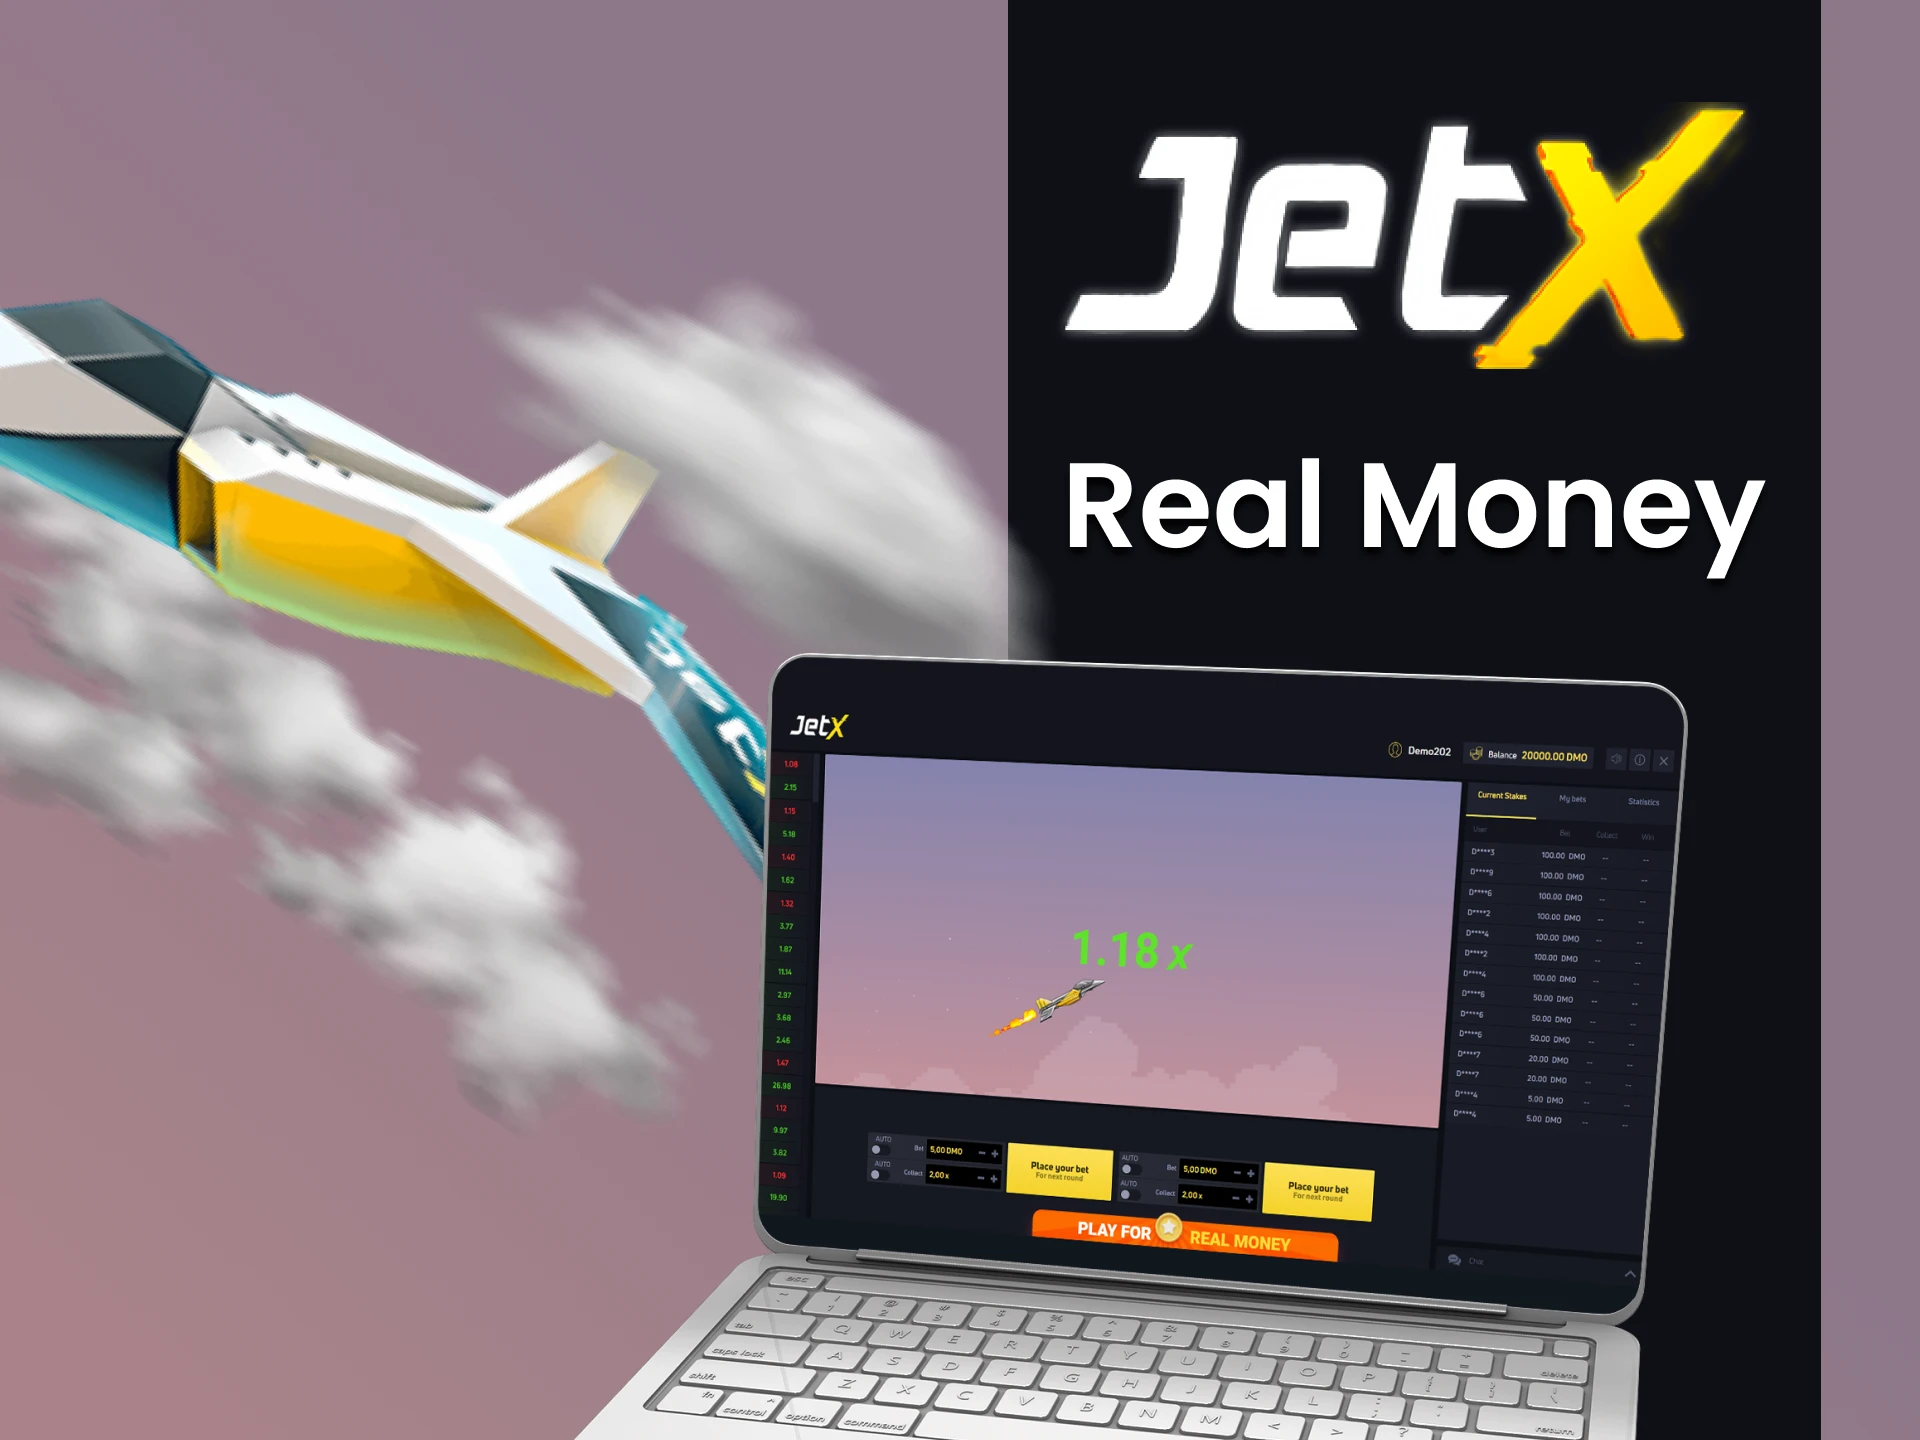 Win real cash in JetX game.